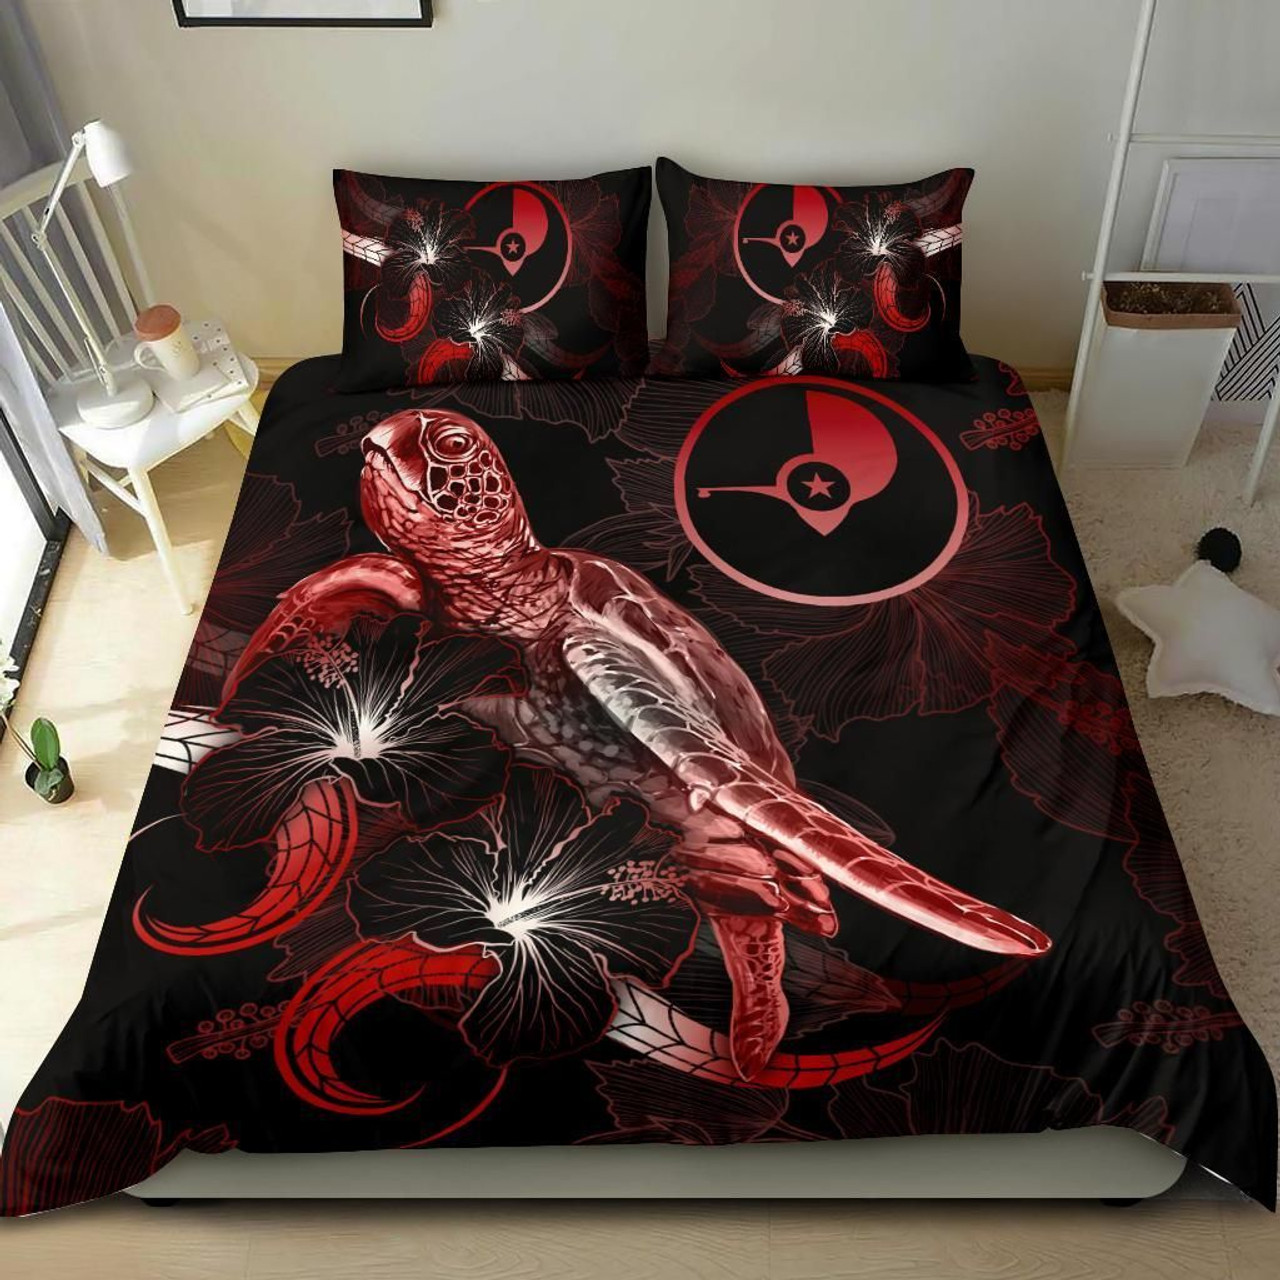 Yap Polynesian Bedding Set - Turtle With Blooming Hibiscus Red 2